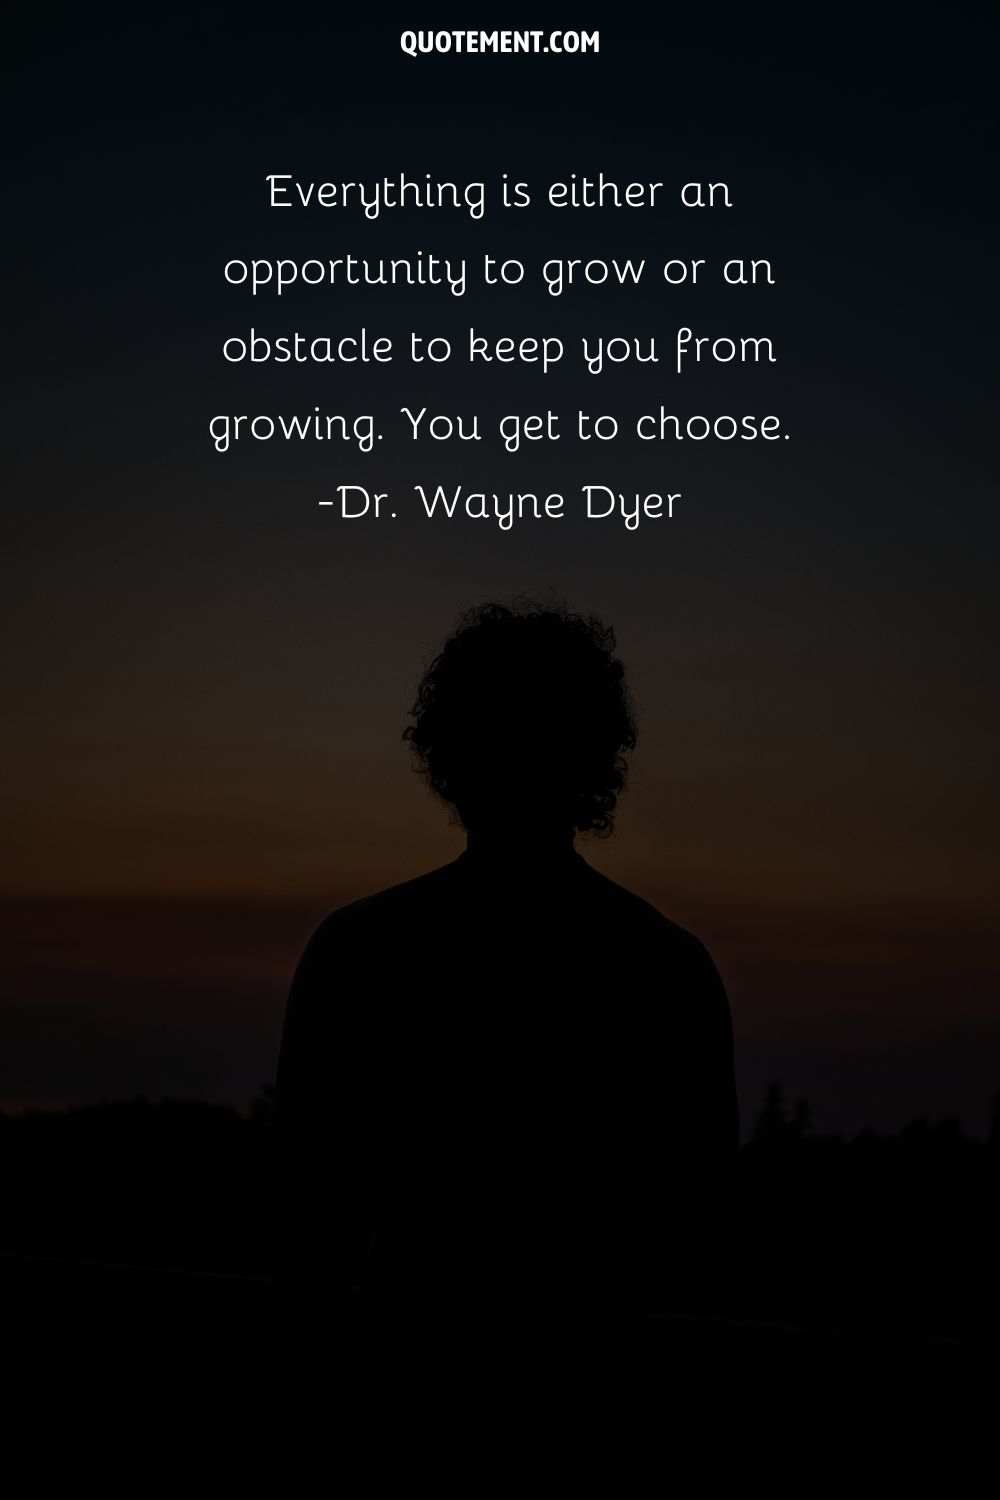 Everything is either an opportunity to grow or an obstacle to keep you from growing